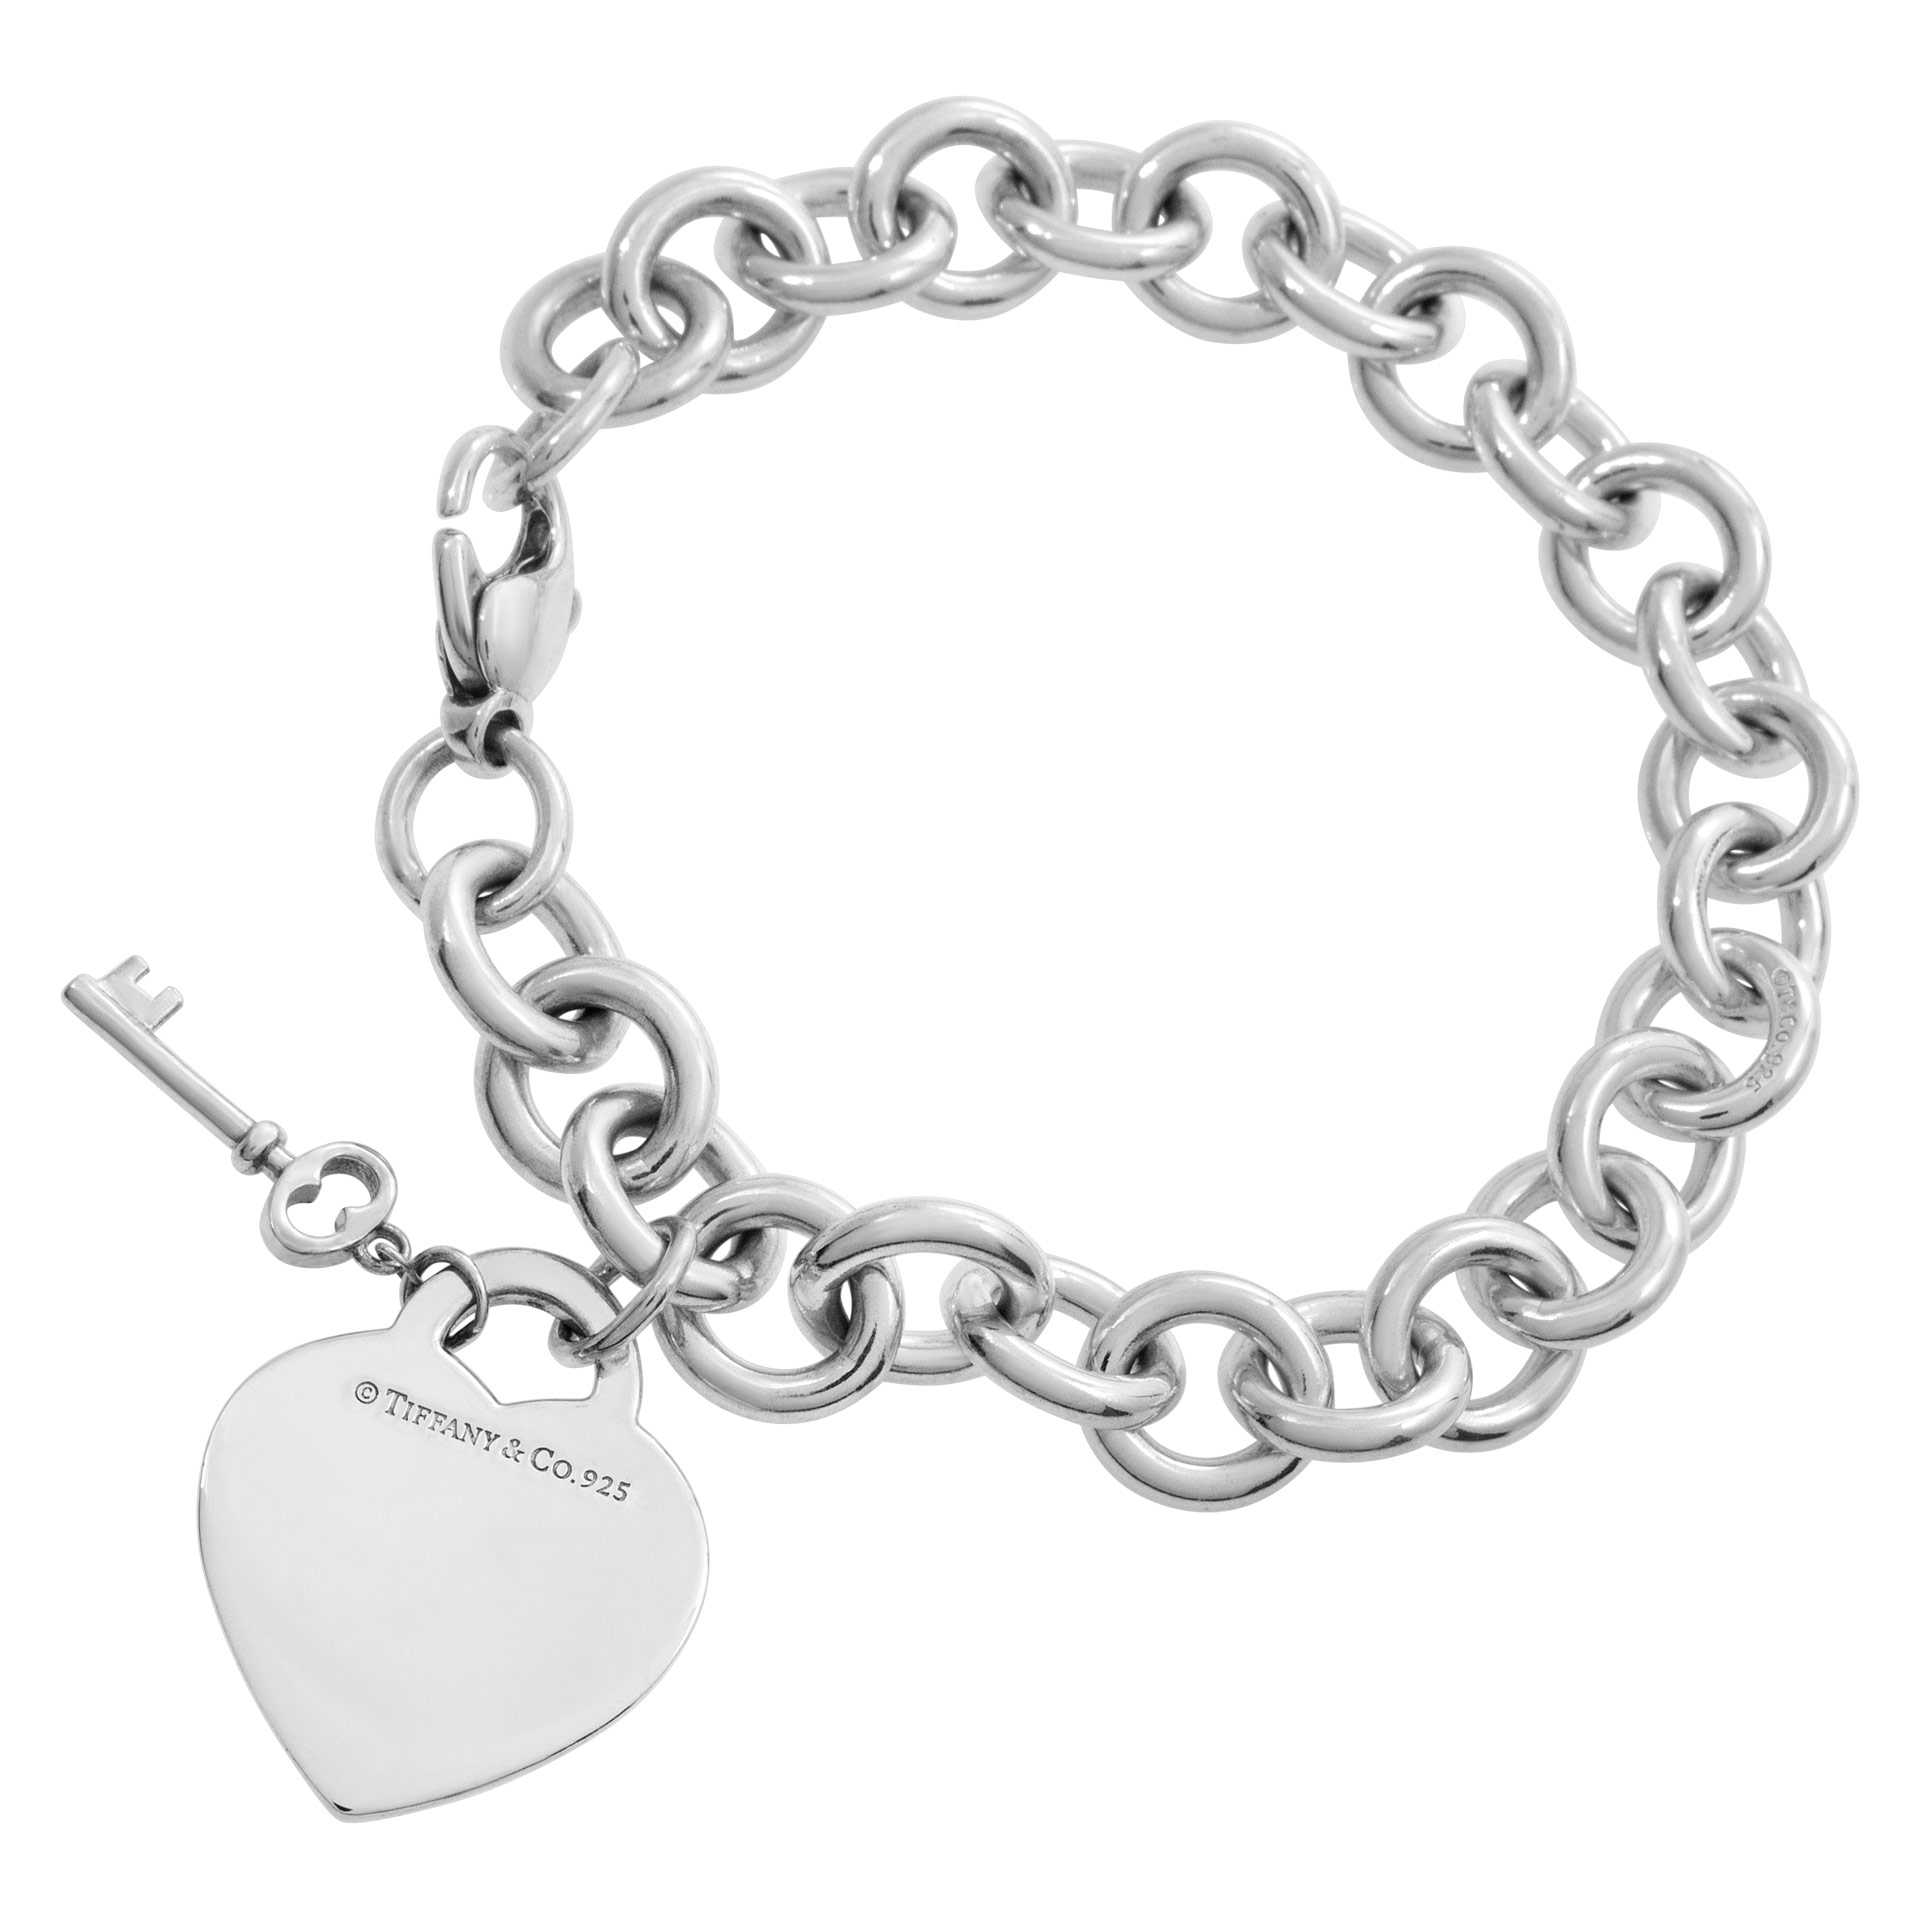 Tiffany and Co."PLEASE RETURN TO TIFFANY" Heart & Key charms bracelet in sterling silver image 1